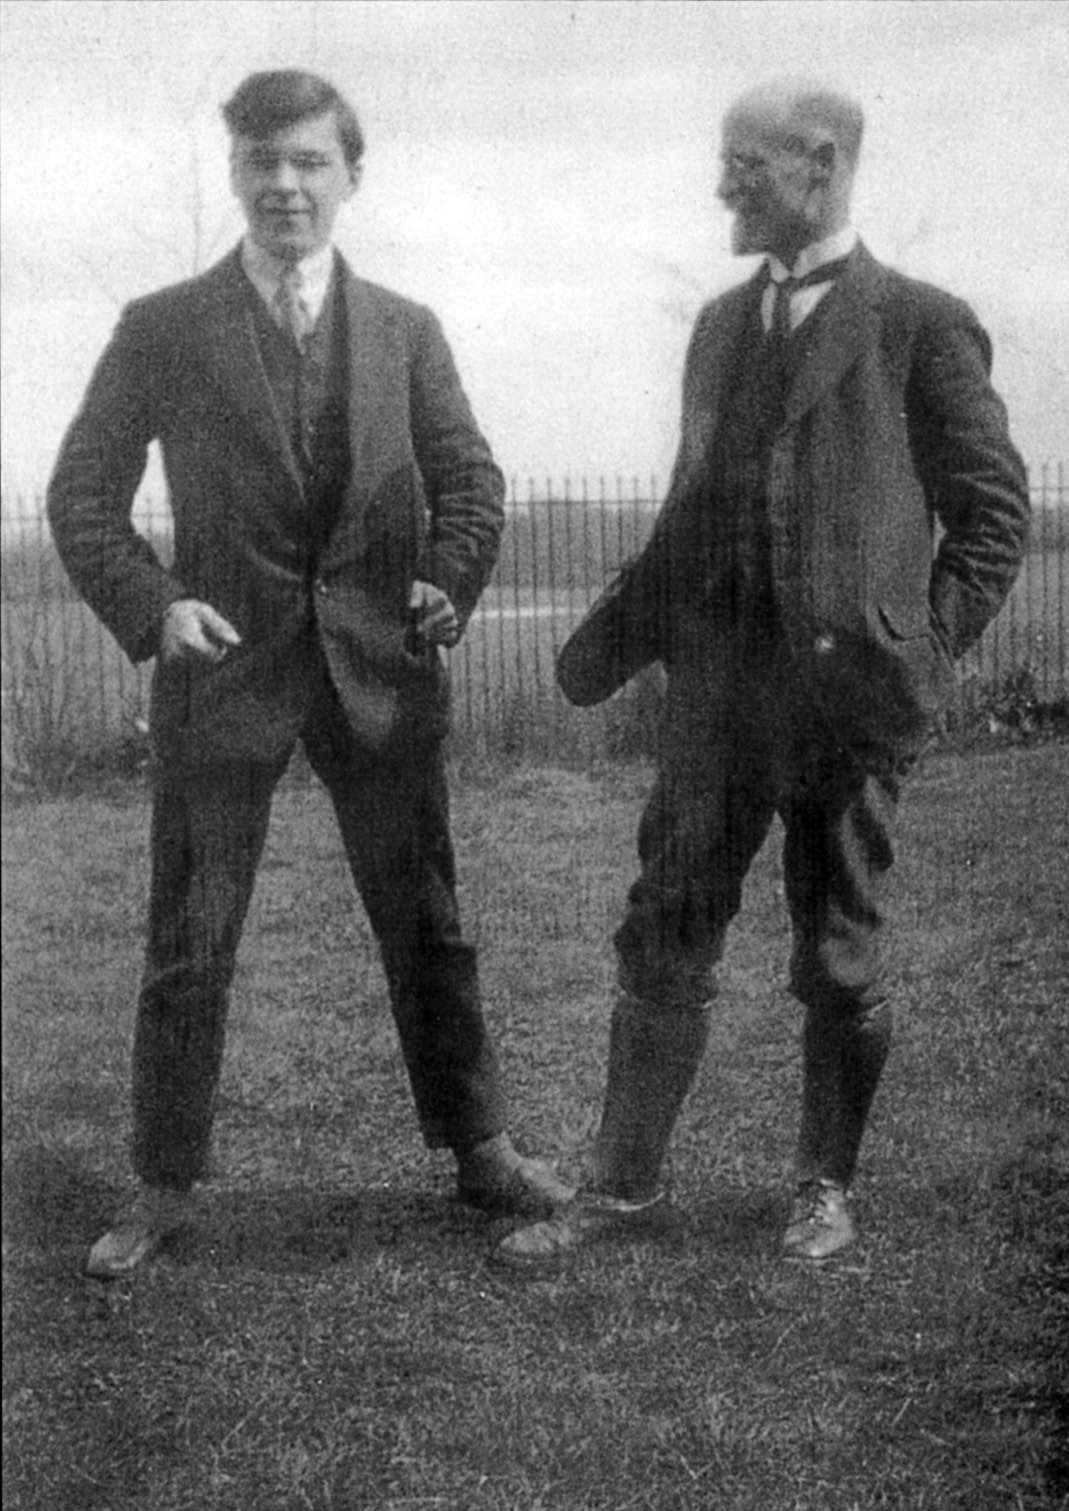 Basil Bunting with his father Thomas Lowe Bunting during World War 1 